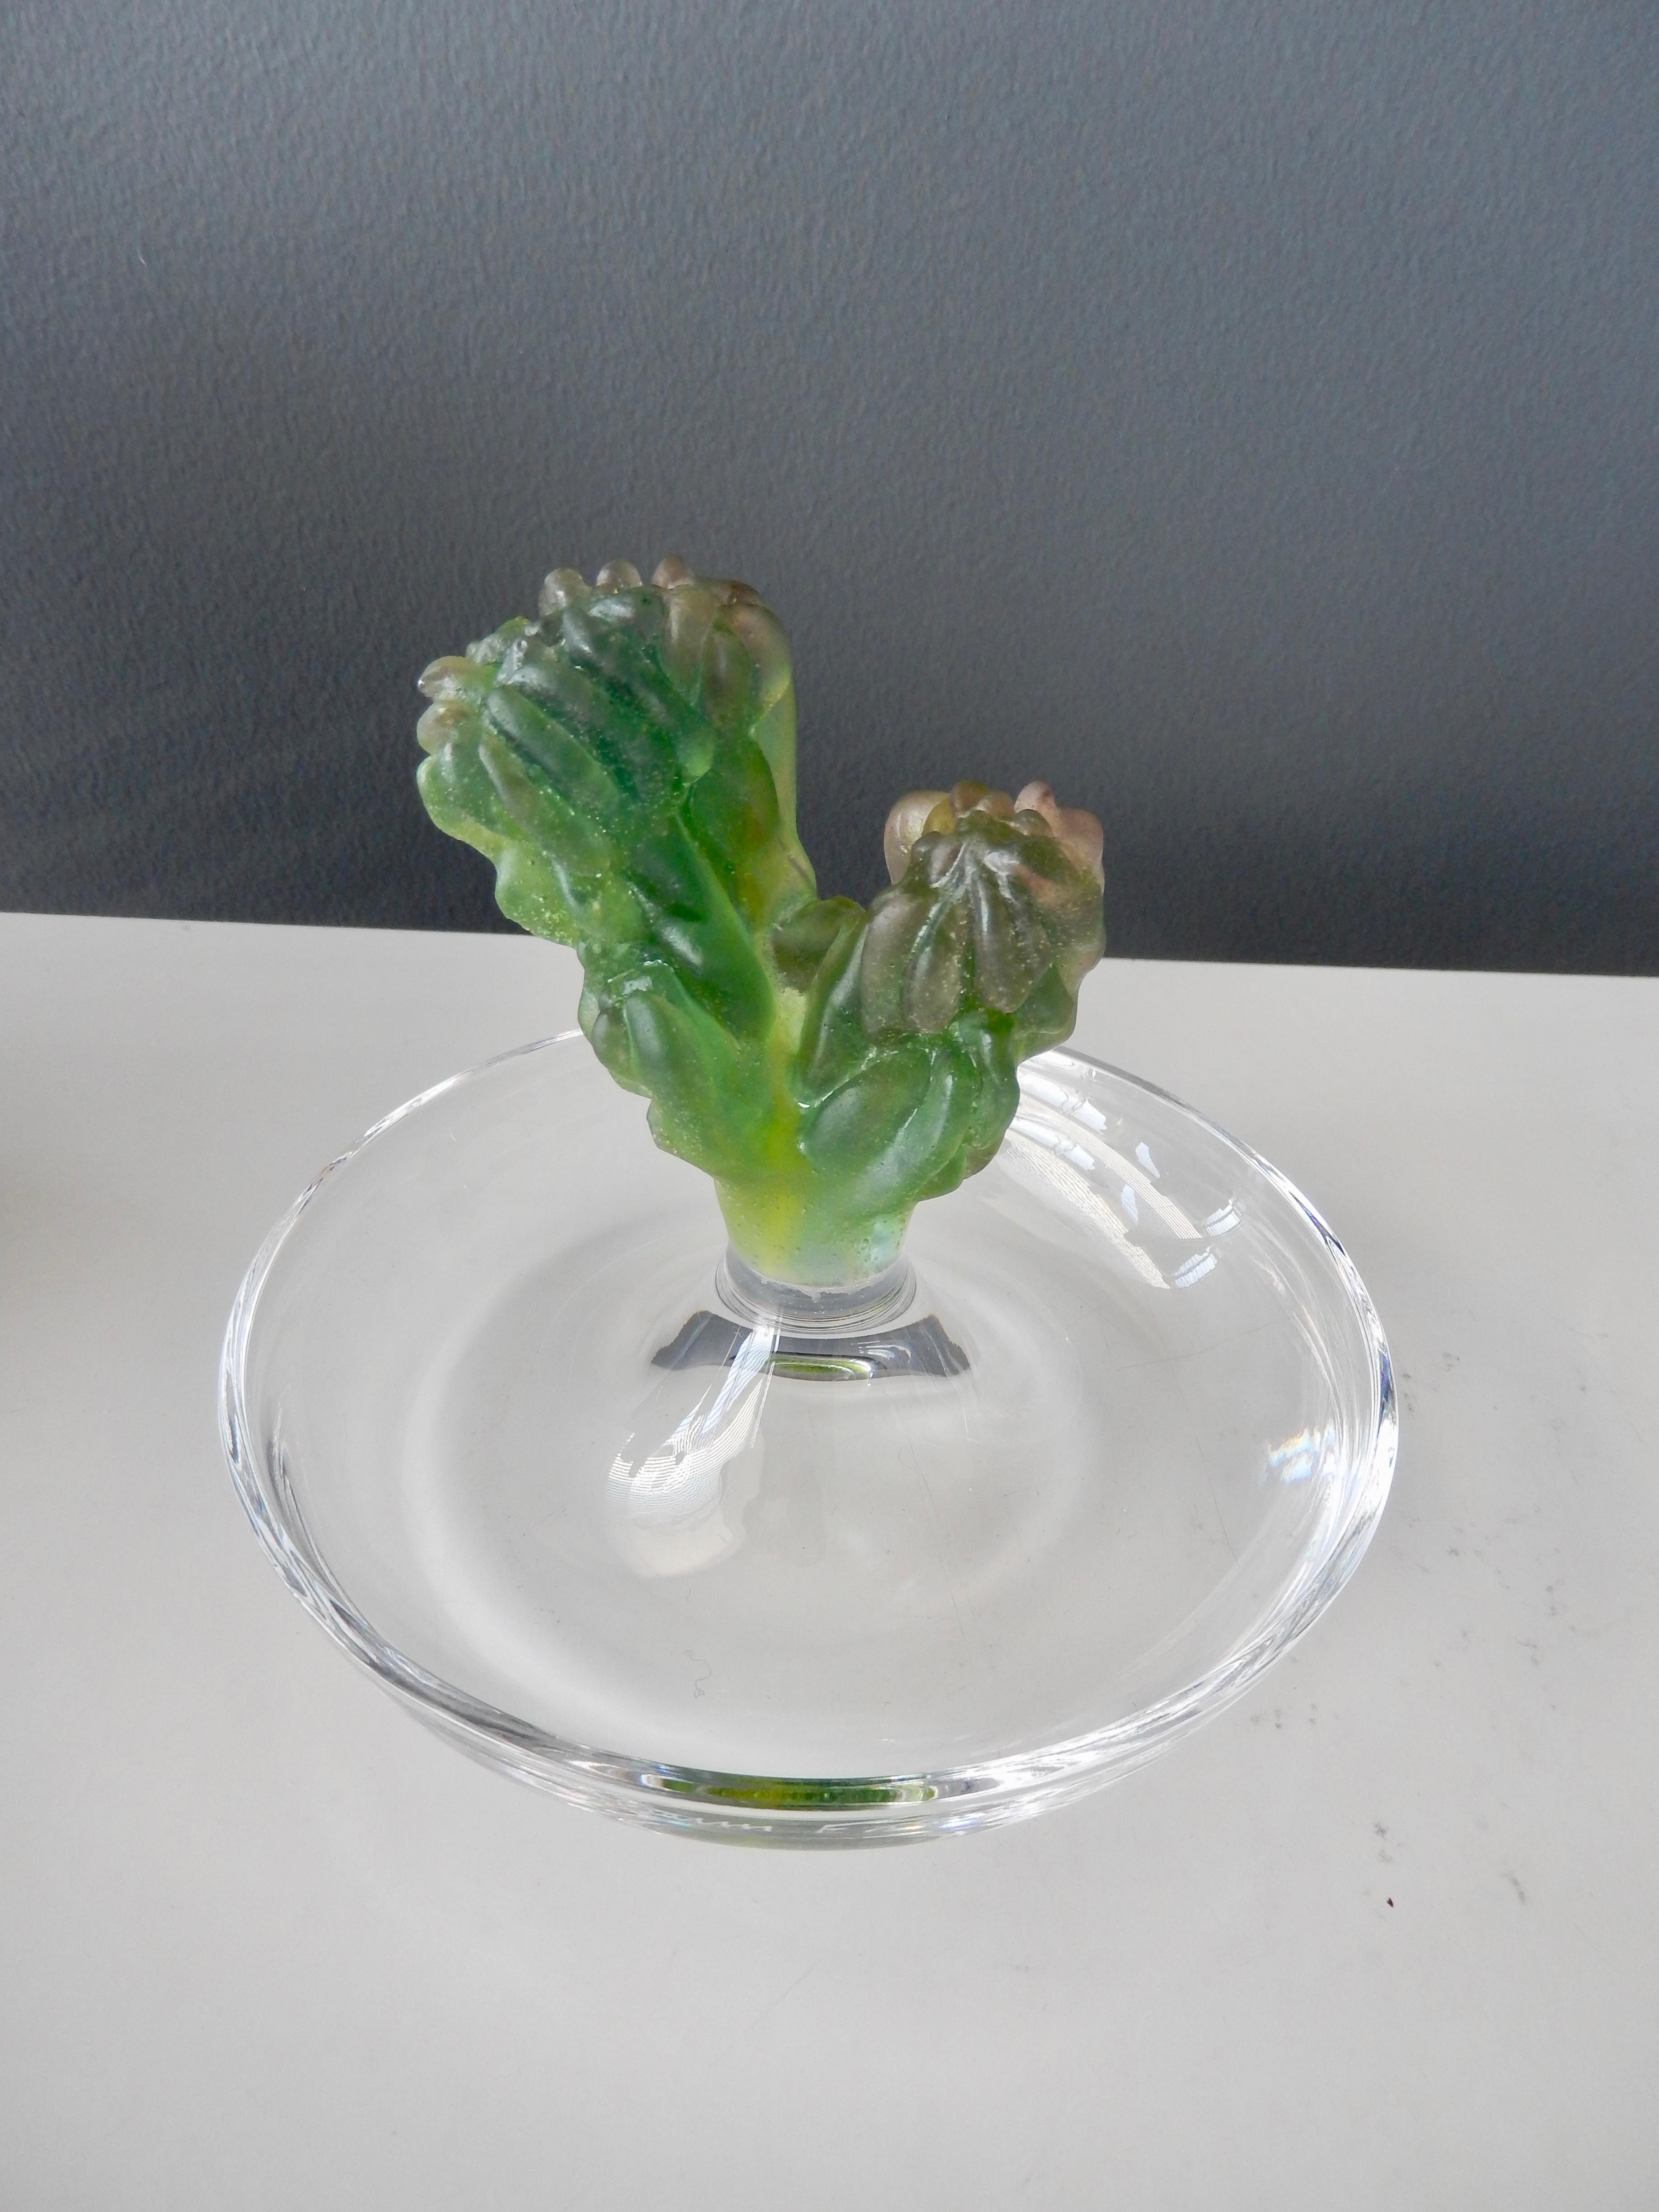 1980s Pair of Daum Pate de Verre Cactus Dishes by Hilton McConnico In Good Condition For Sale In Winnetka, IL